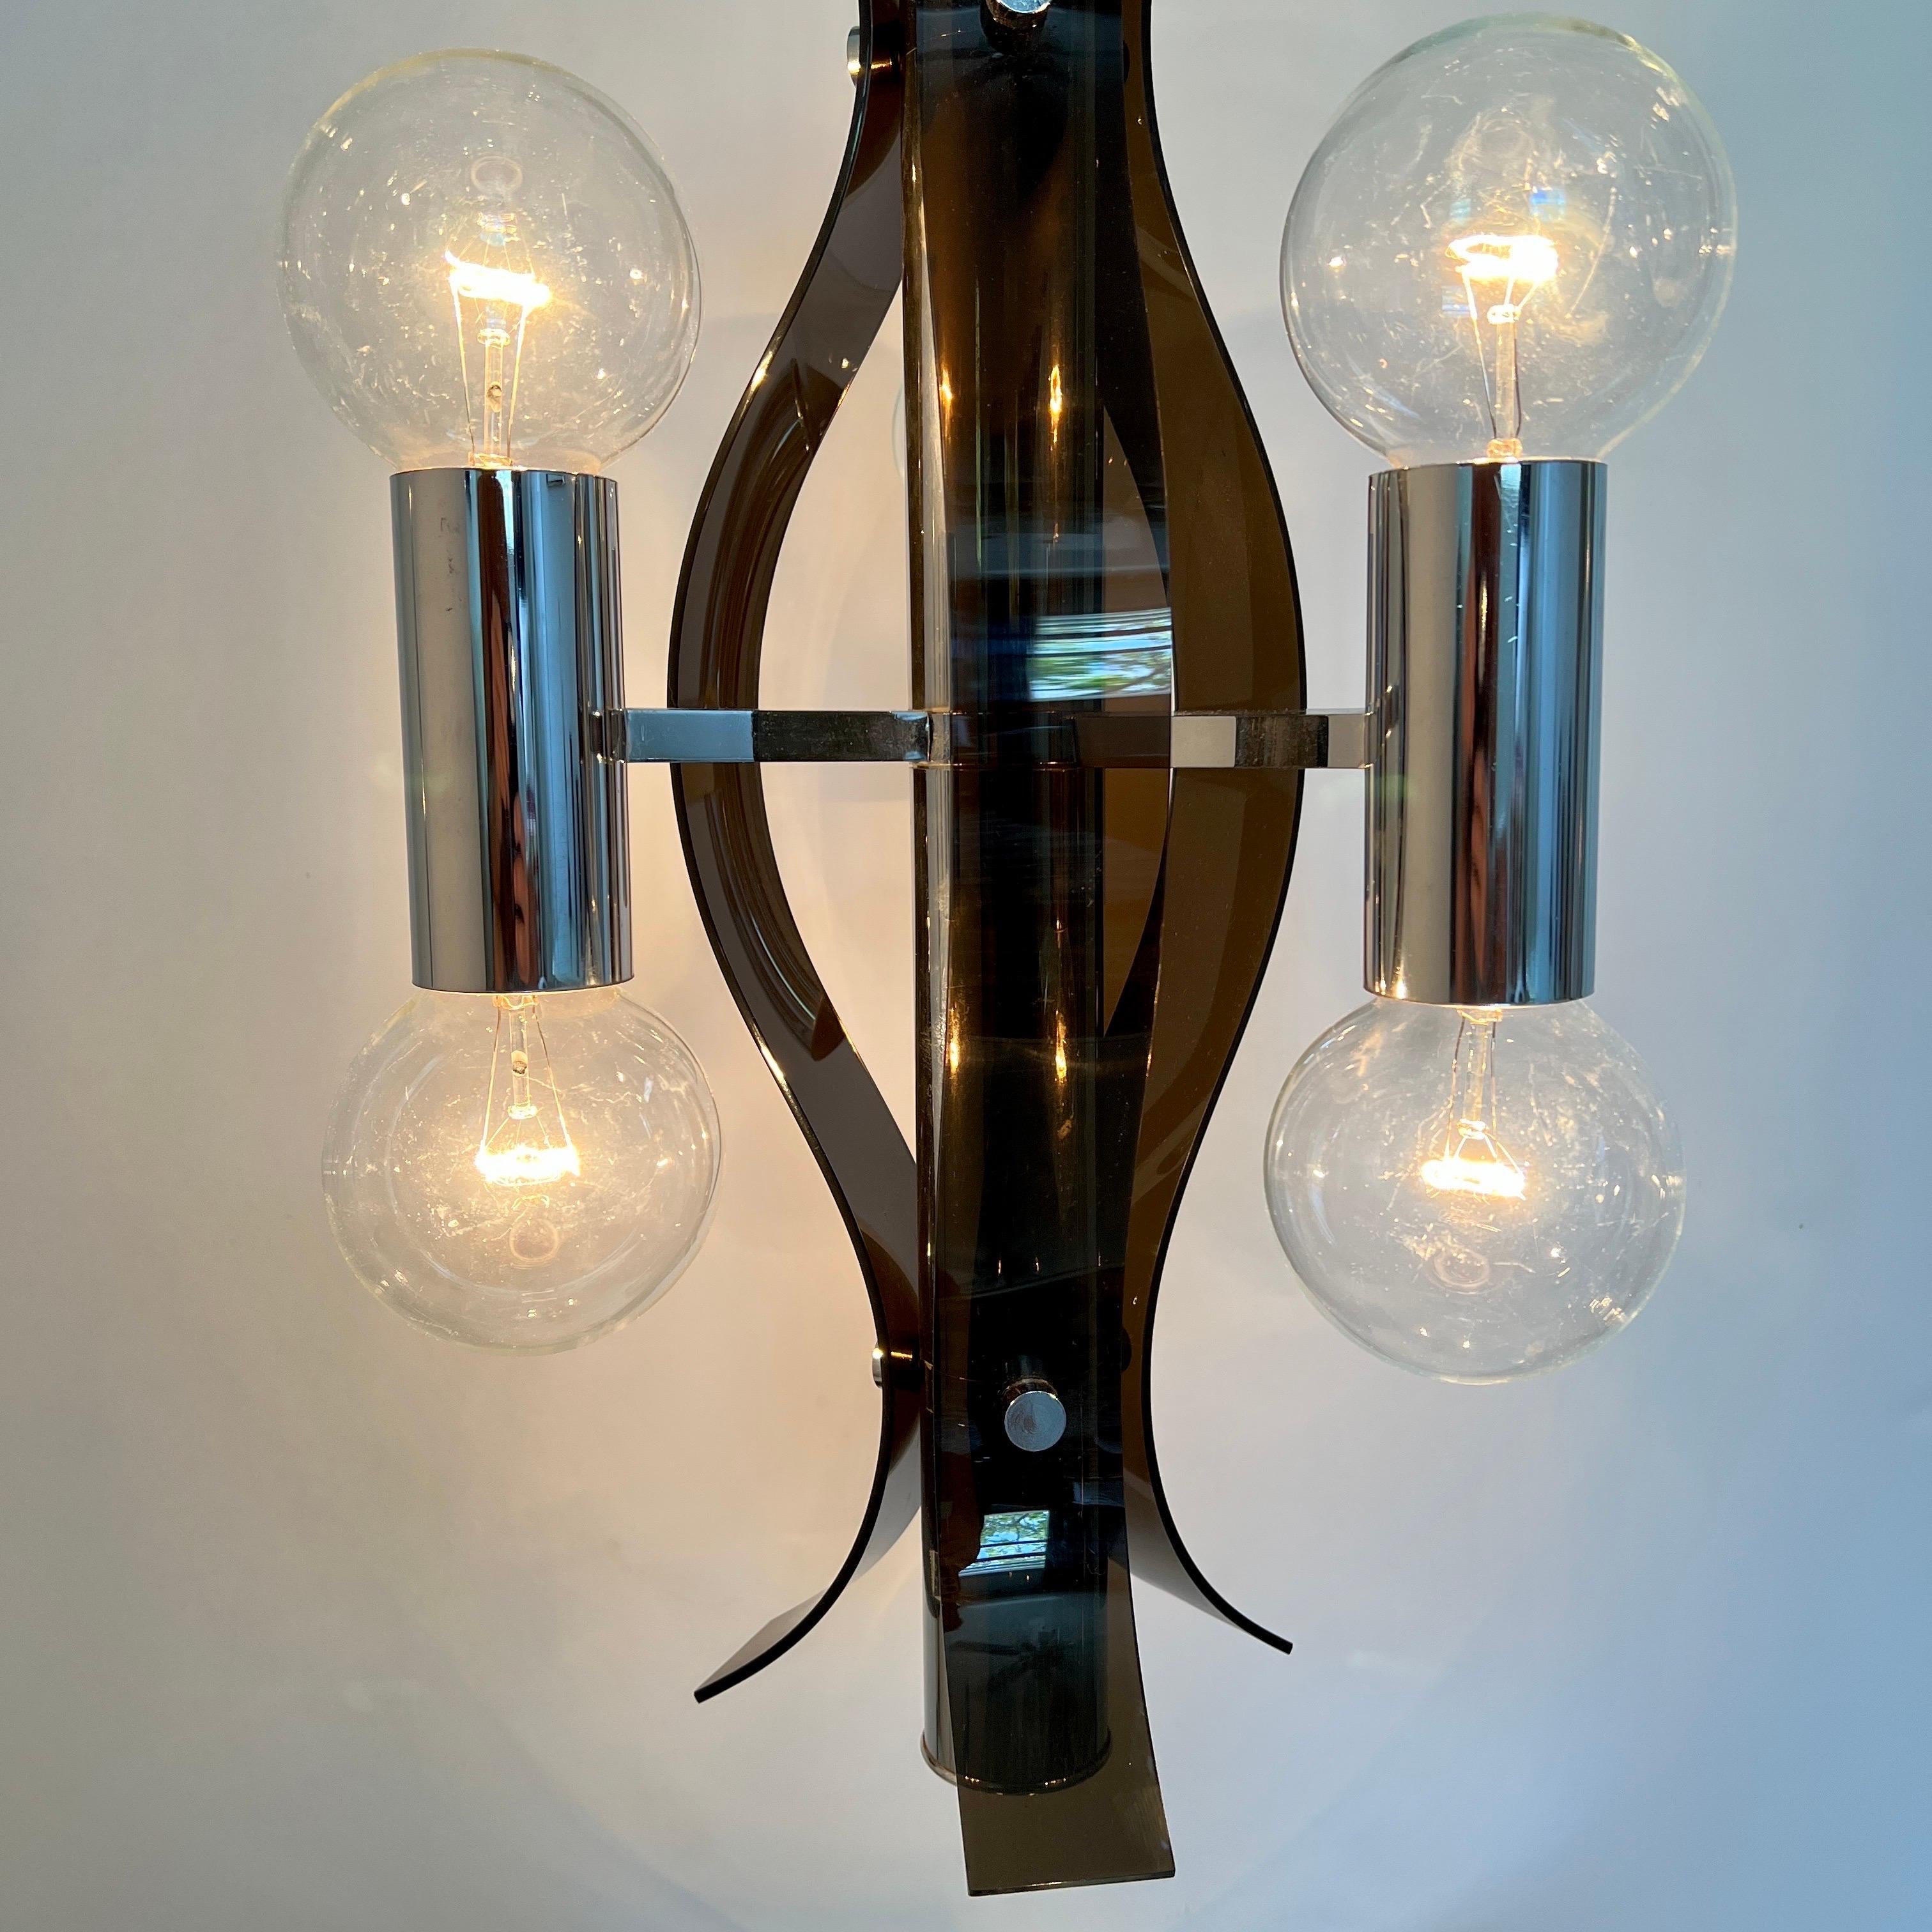 Sculptural Chandelier in Chrome and Smoked Lucite, Robert Sonneman, c. 1970's For Sale 5